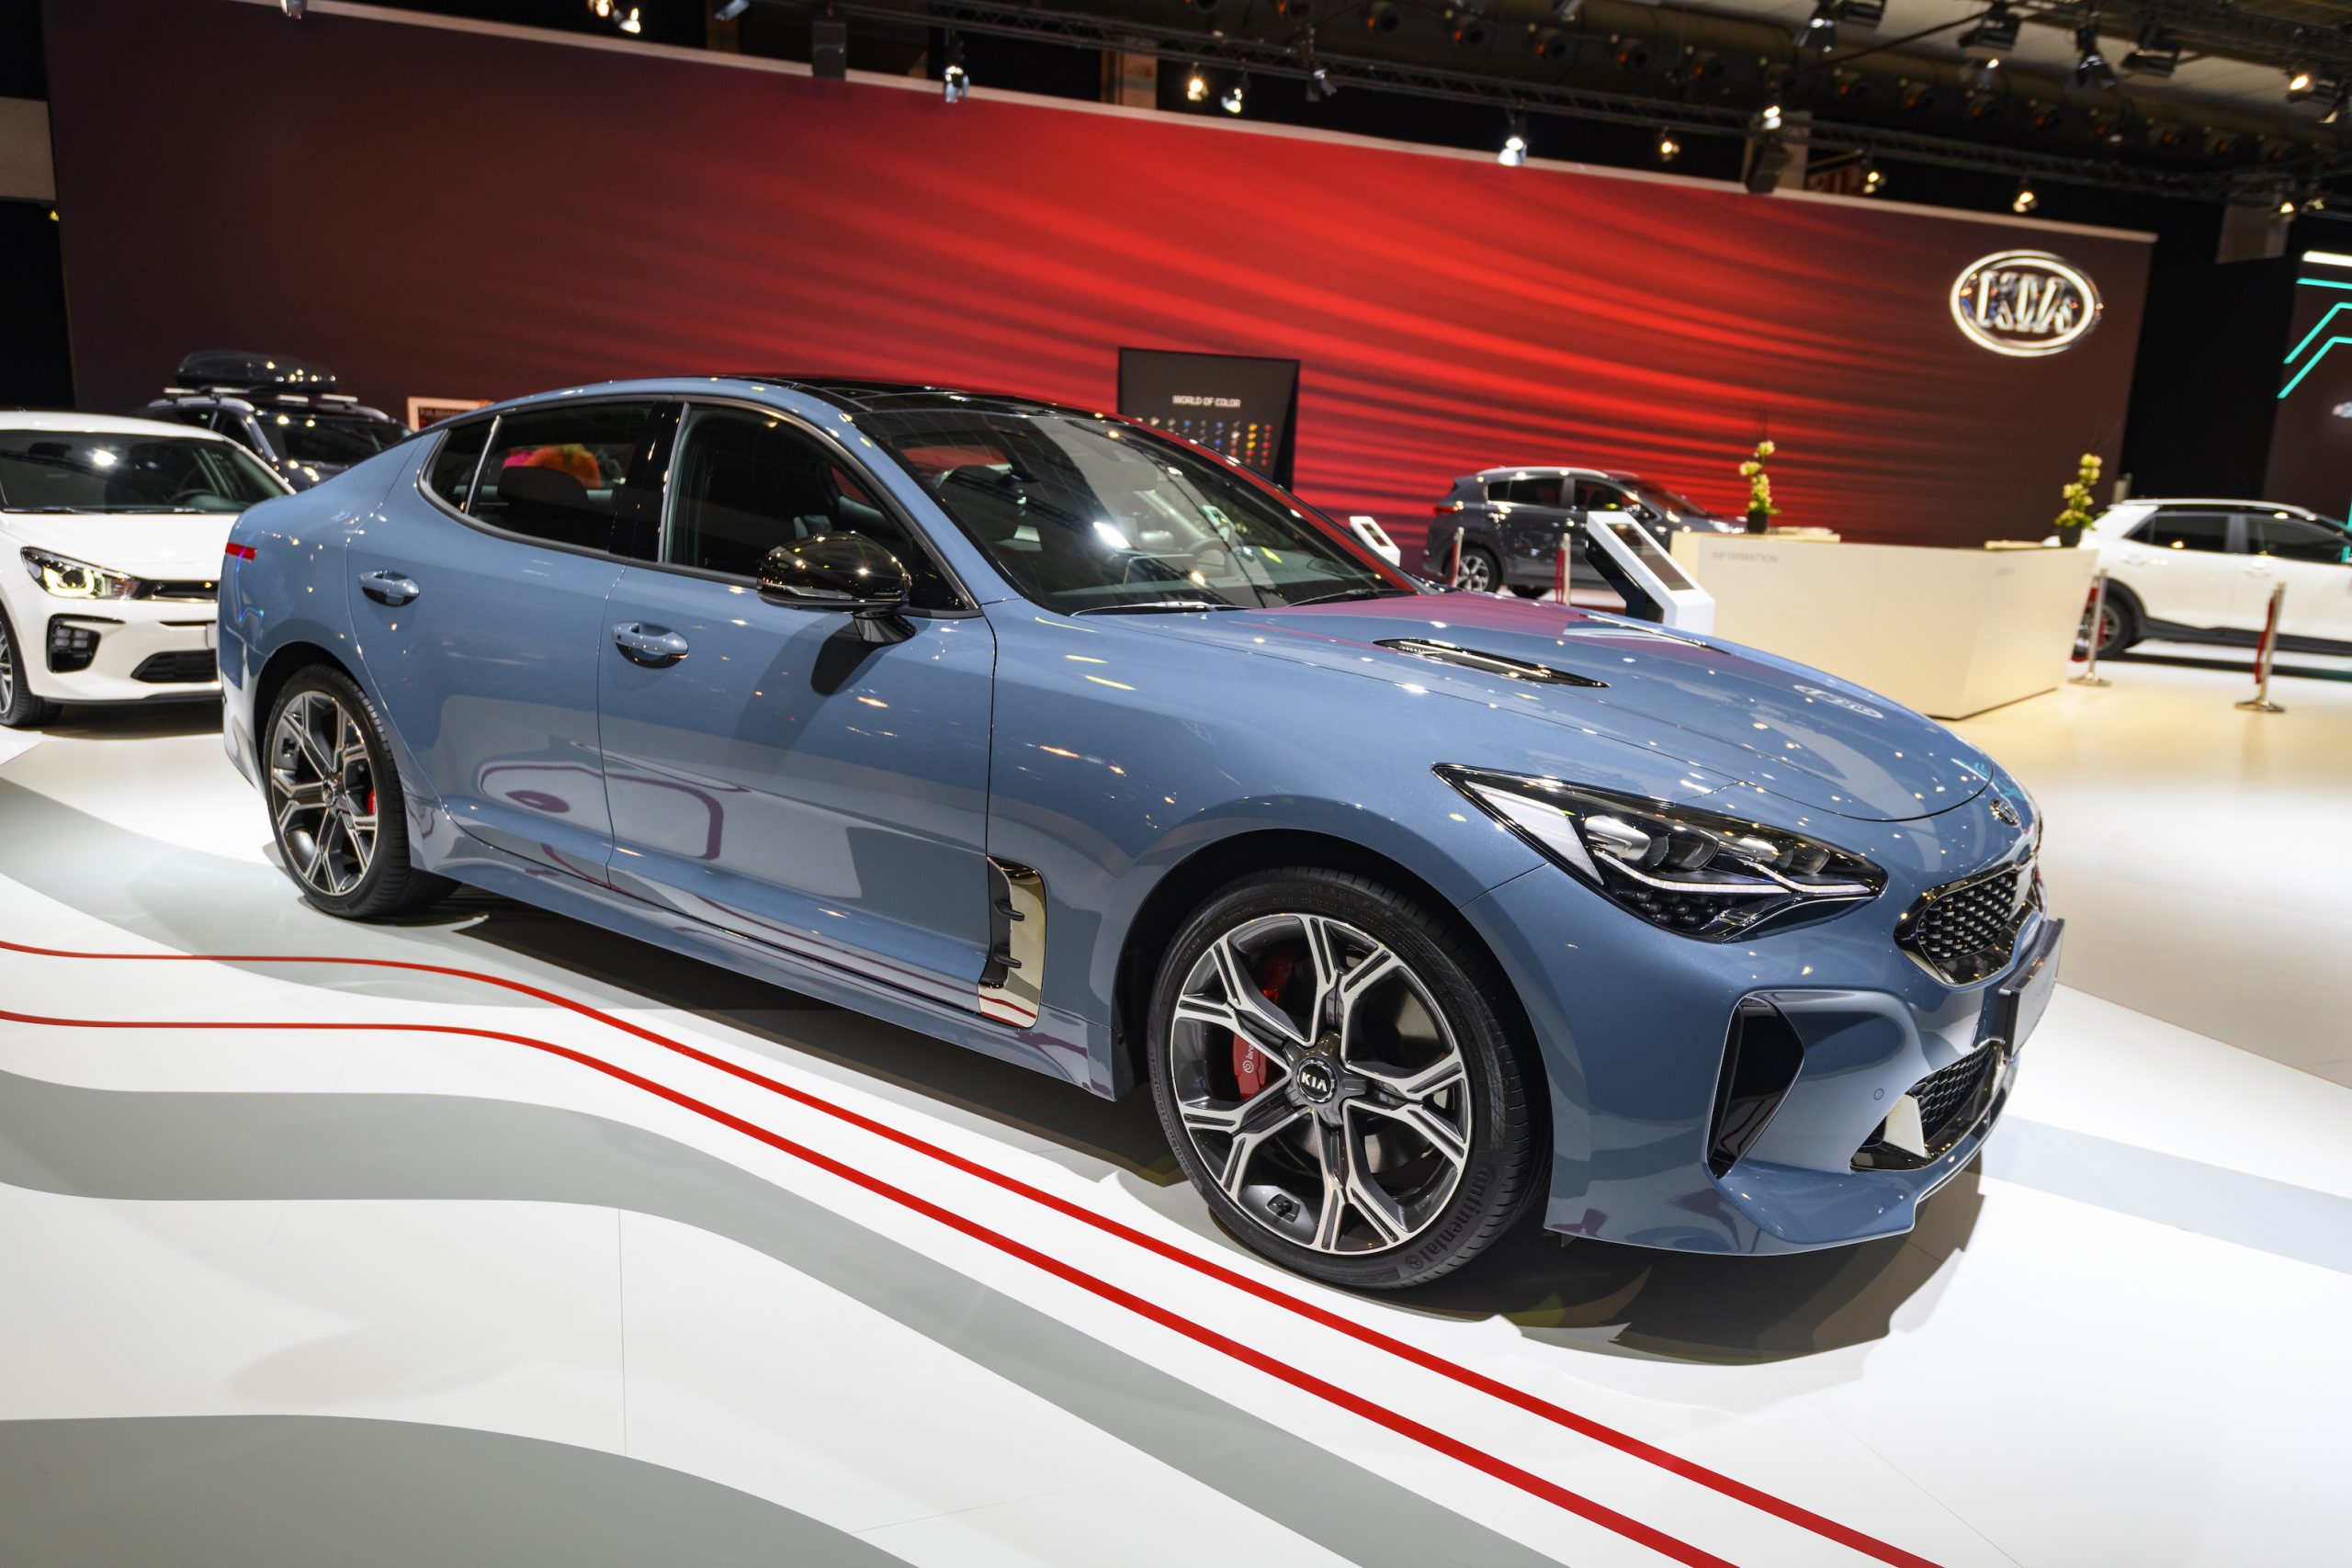 Blue Kia Stinger compact executive 4-door fastback on display at Brussels Expo